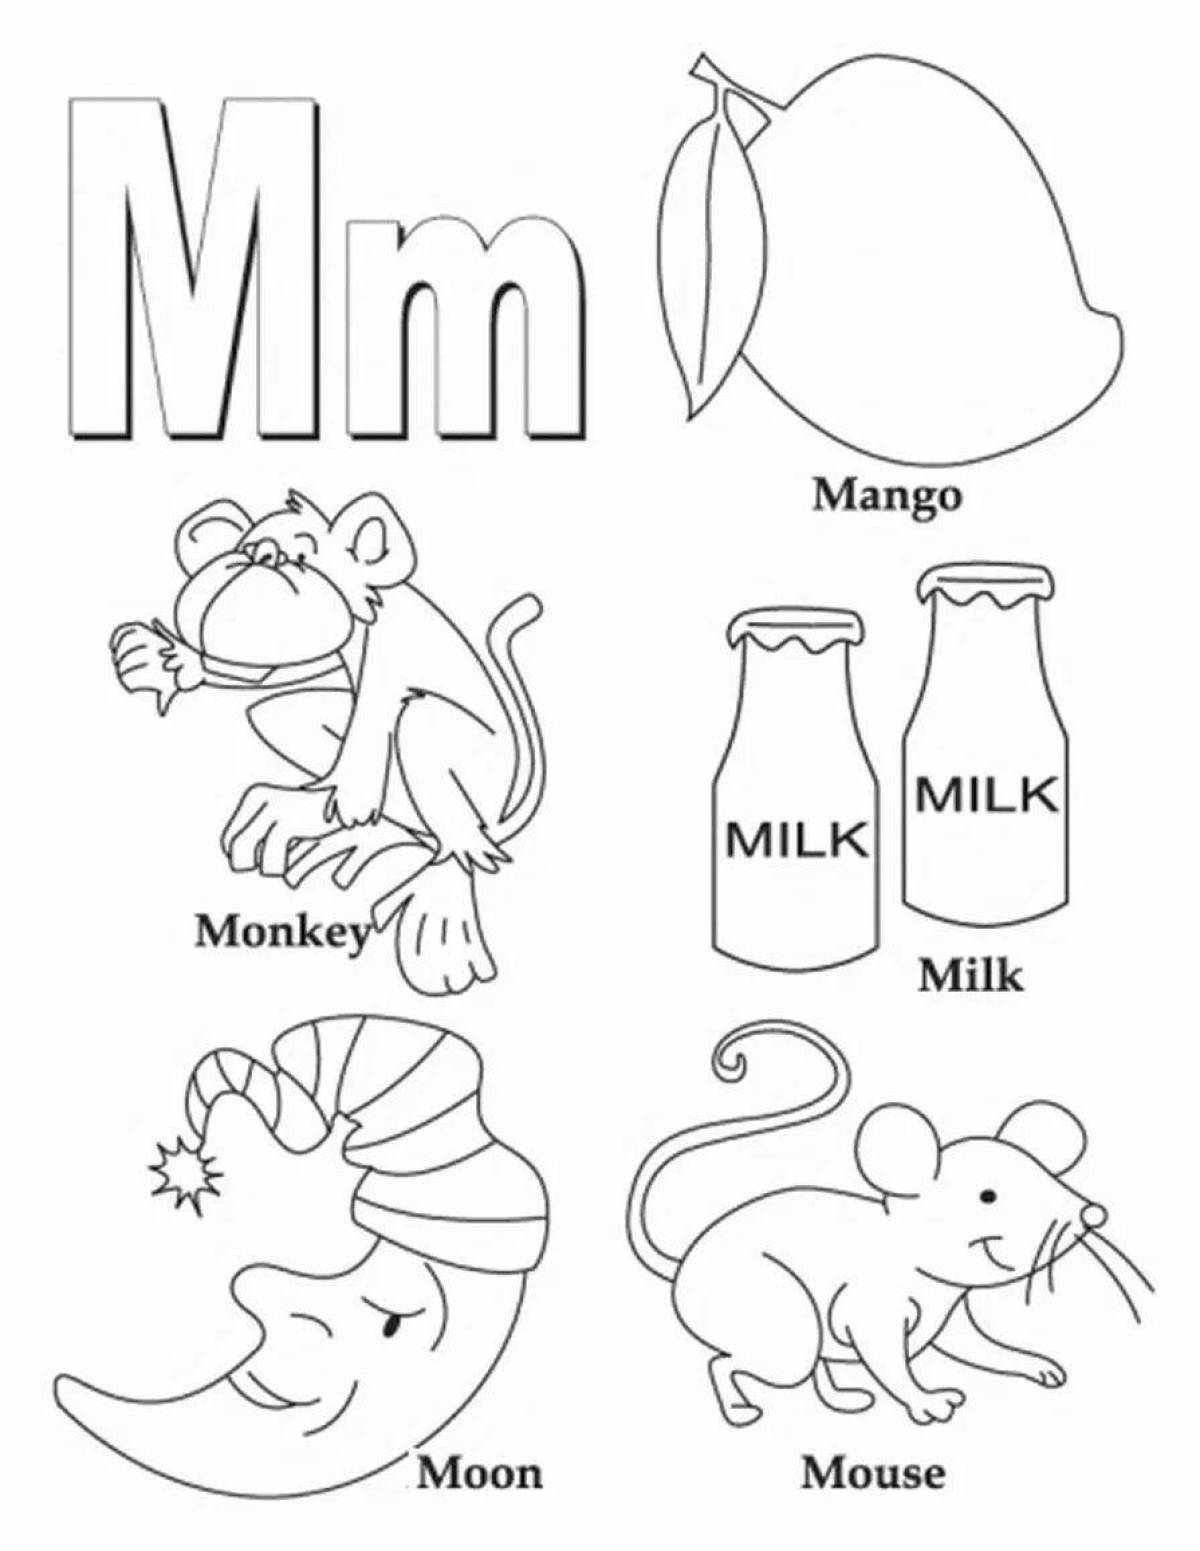 Colourful english letters coloring page for juniors